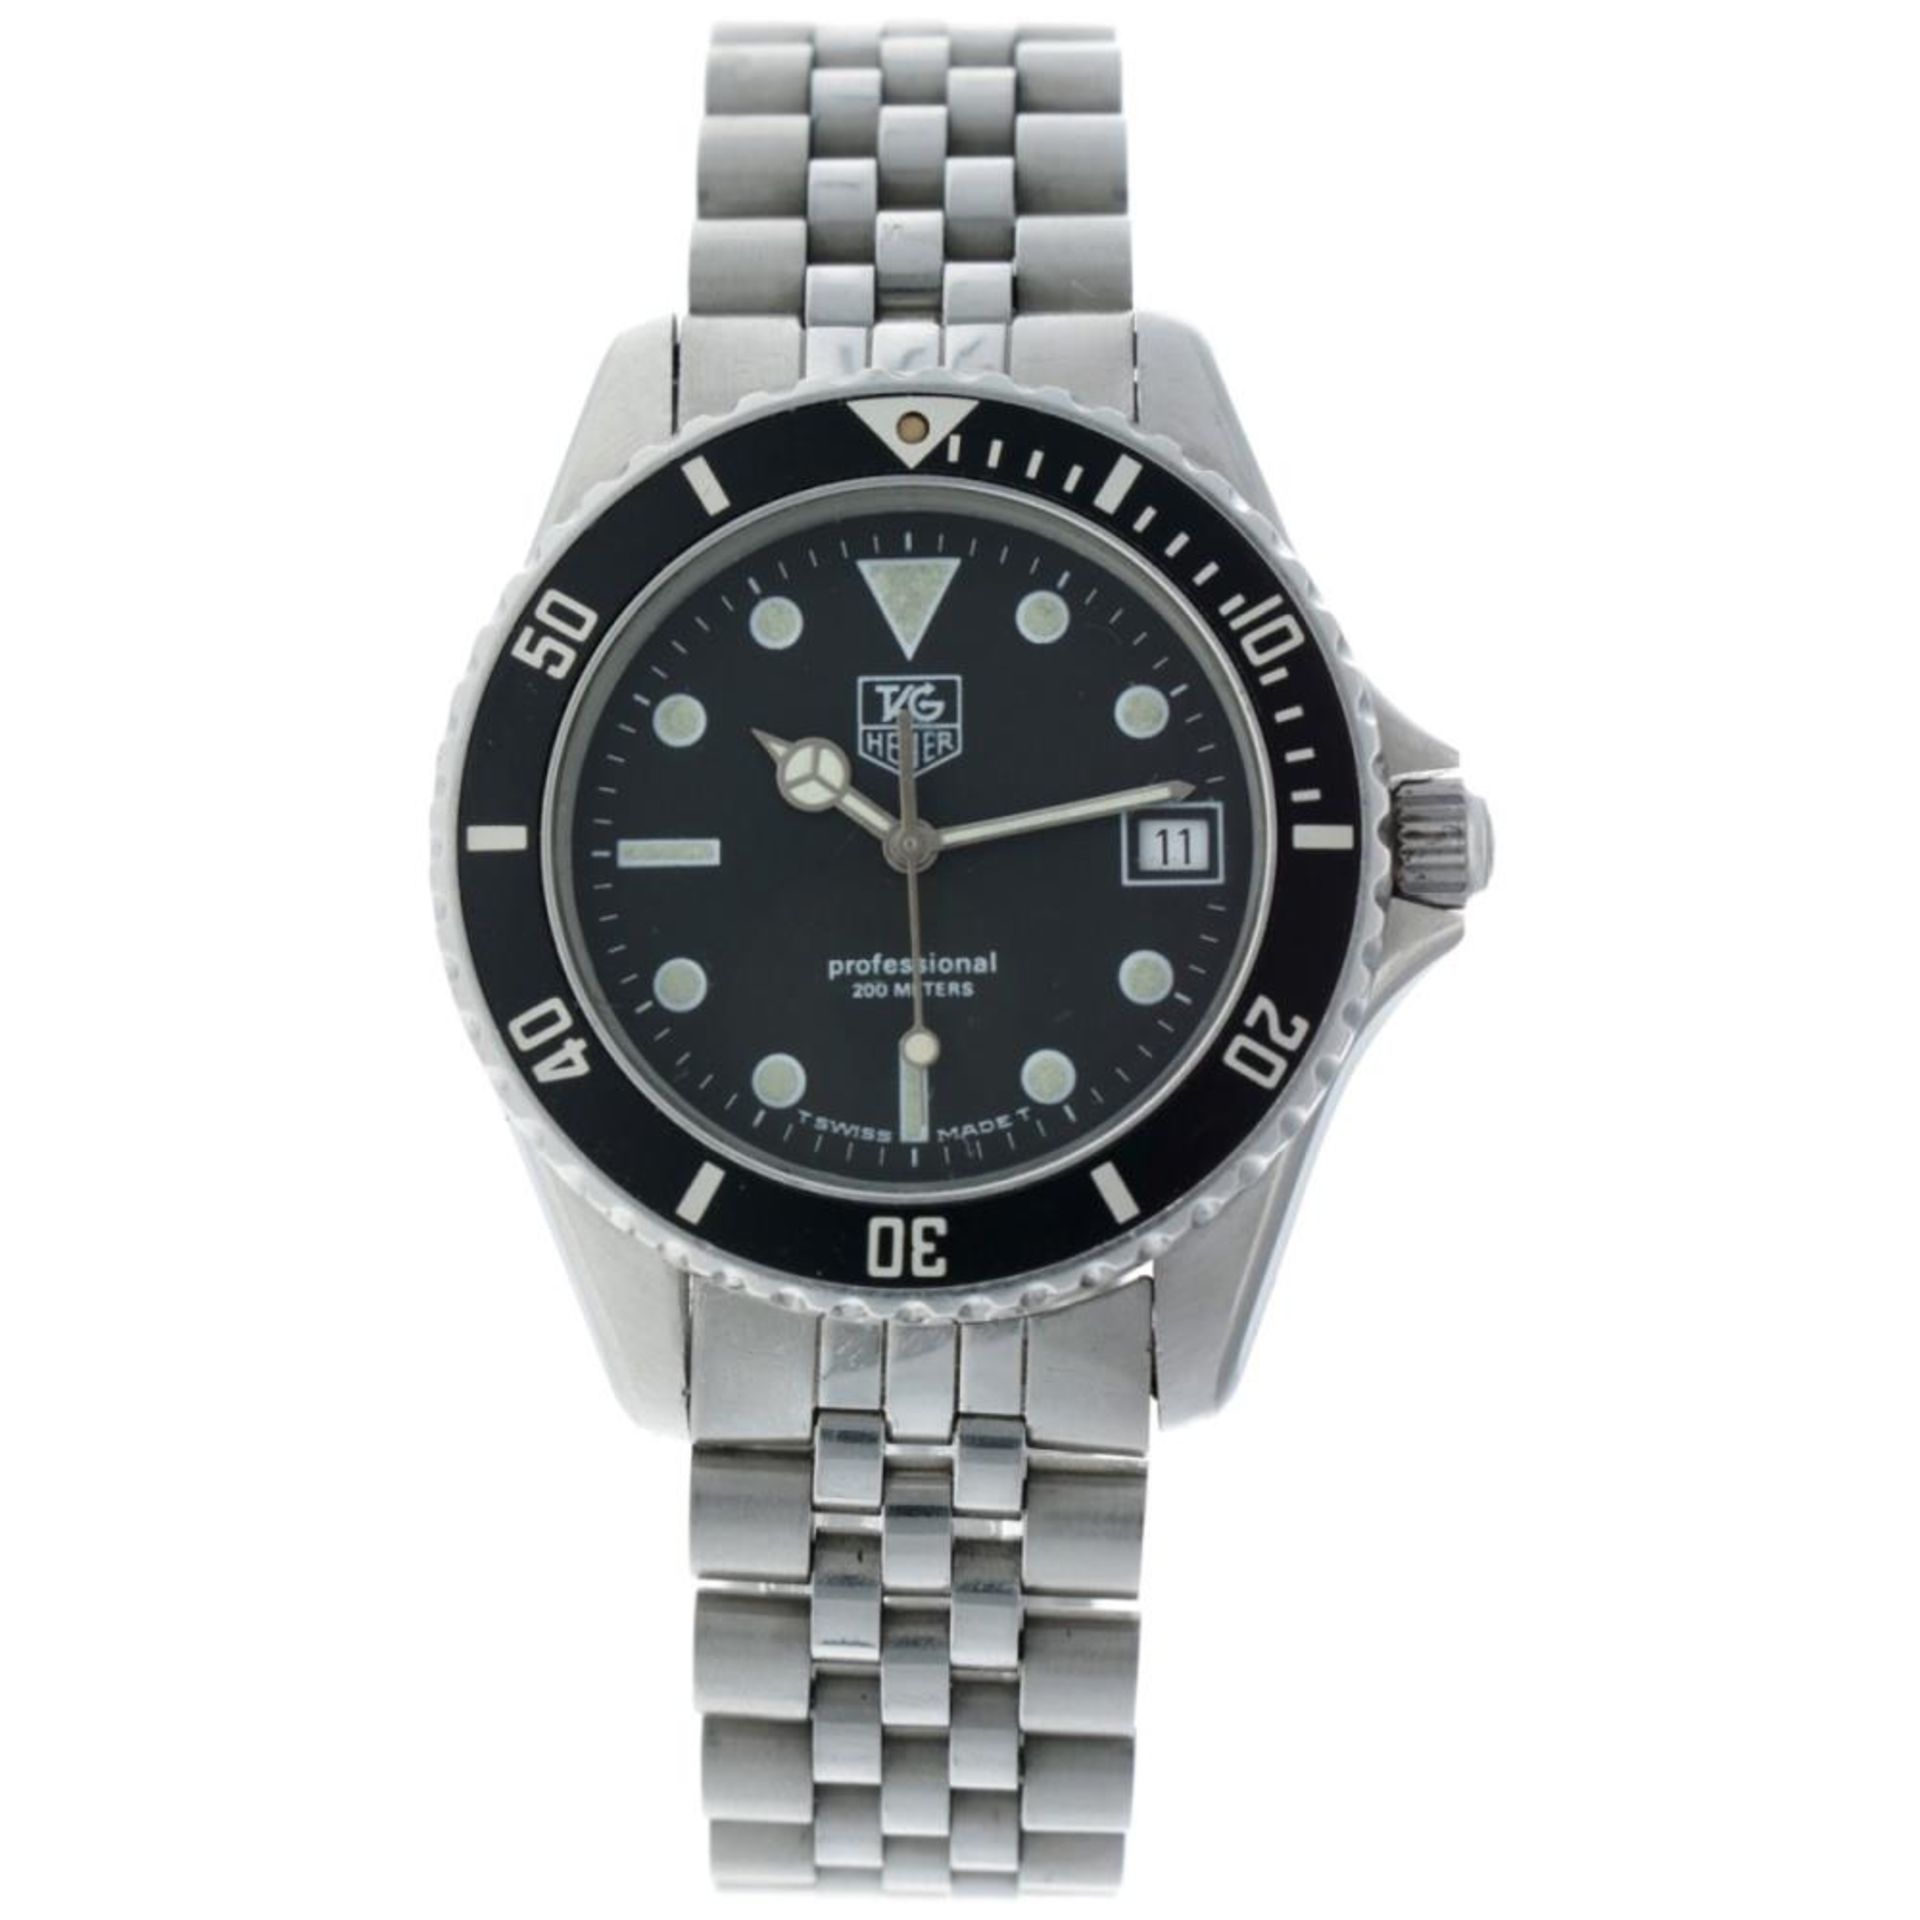 TAG Heuer Professional 200 980.013 - Men's watch - approx. 1985. - Image 2 of 10